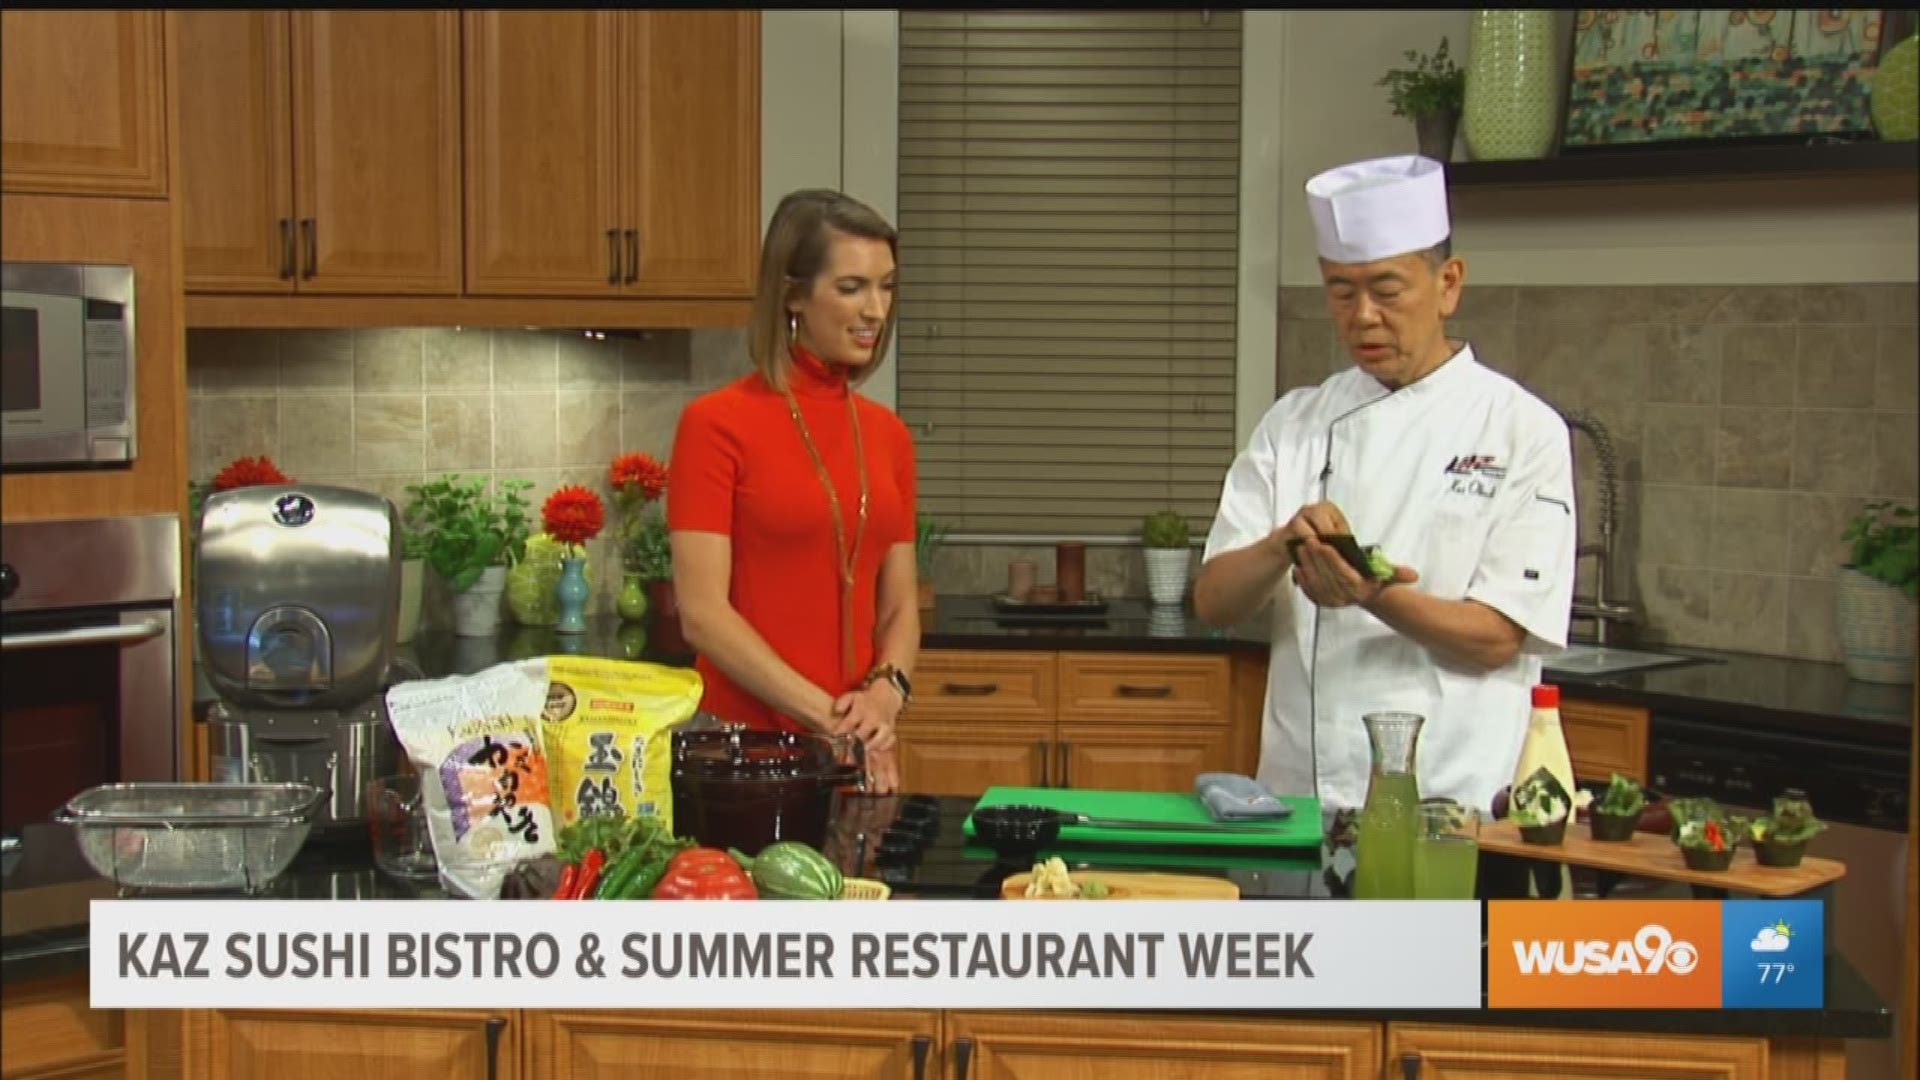 Kaz Sushi Bistro owner and executive chef Kaz Okochi teaches us how to make sushi and tells us what vegetarians should order when eating at a sushi restaurant. Be sure to enjoy Chef Kaz's mastery at Kaz Sushi Bistro during Summer Restaurant Week, which ends August 18th, 2019.